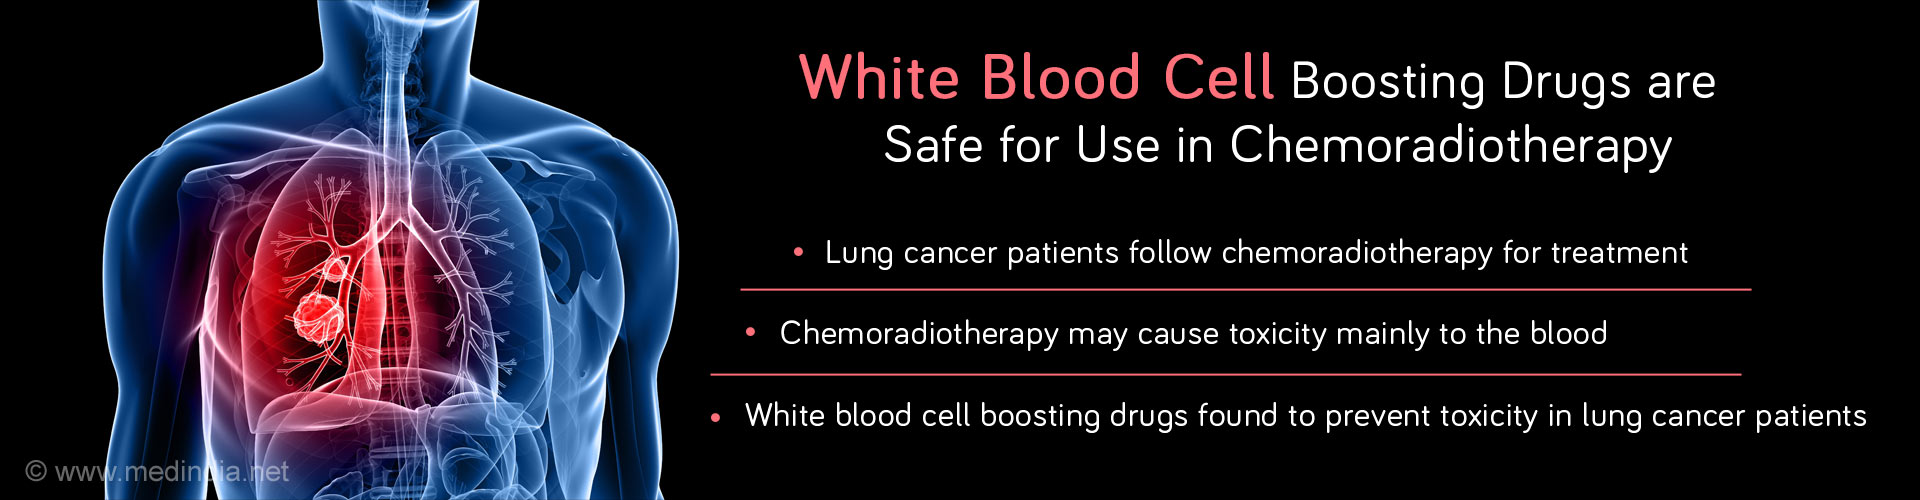 White blood cell boosting drugs are safe for use in chemoradiotherapy
- Lunch cancer patients follow chemoradiotherapy for treatment
- Chemoradiotherapy may cause toxicity mainly to the blood
- White blood cells boosting drugs found to prevent toxicity in lung cancer patients